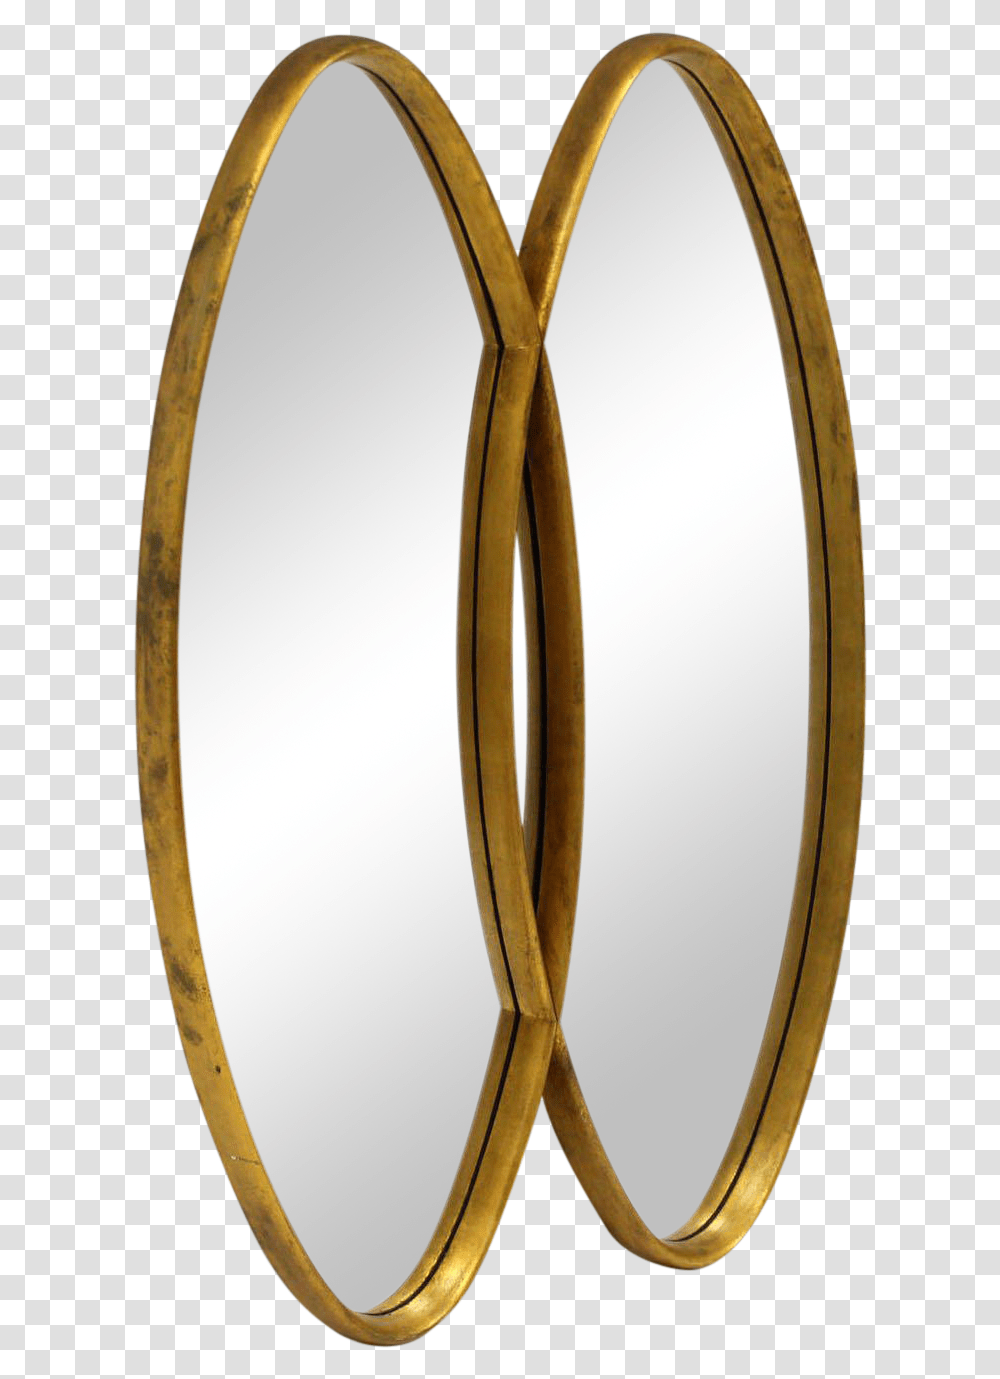 Dual Interlocking Oval Gold Frame Mirror For Sale Circle Transparent Png